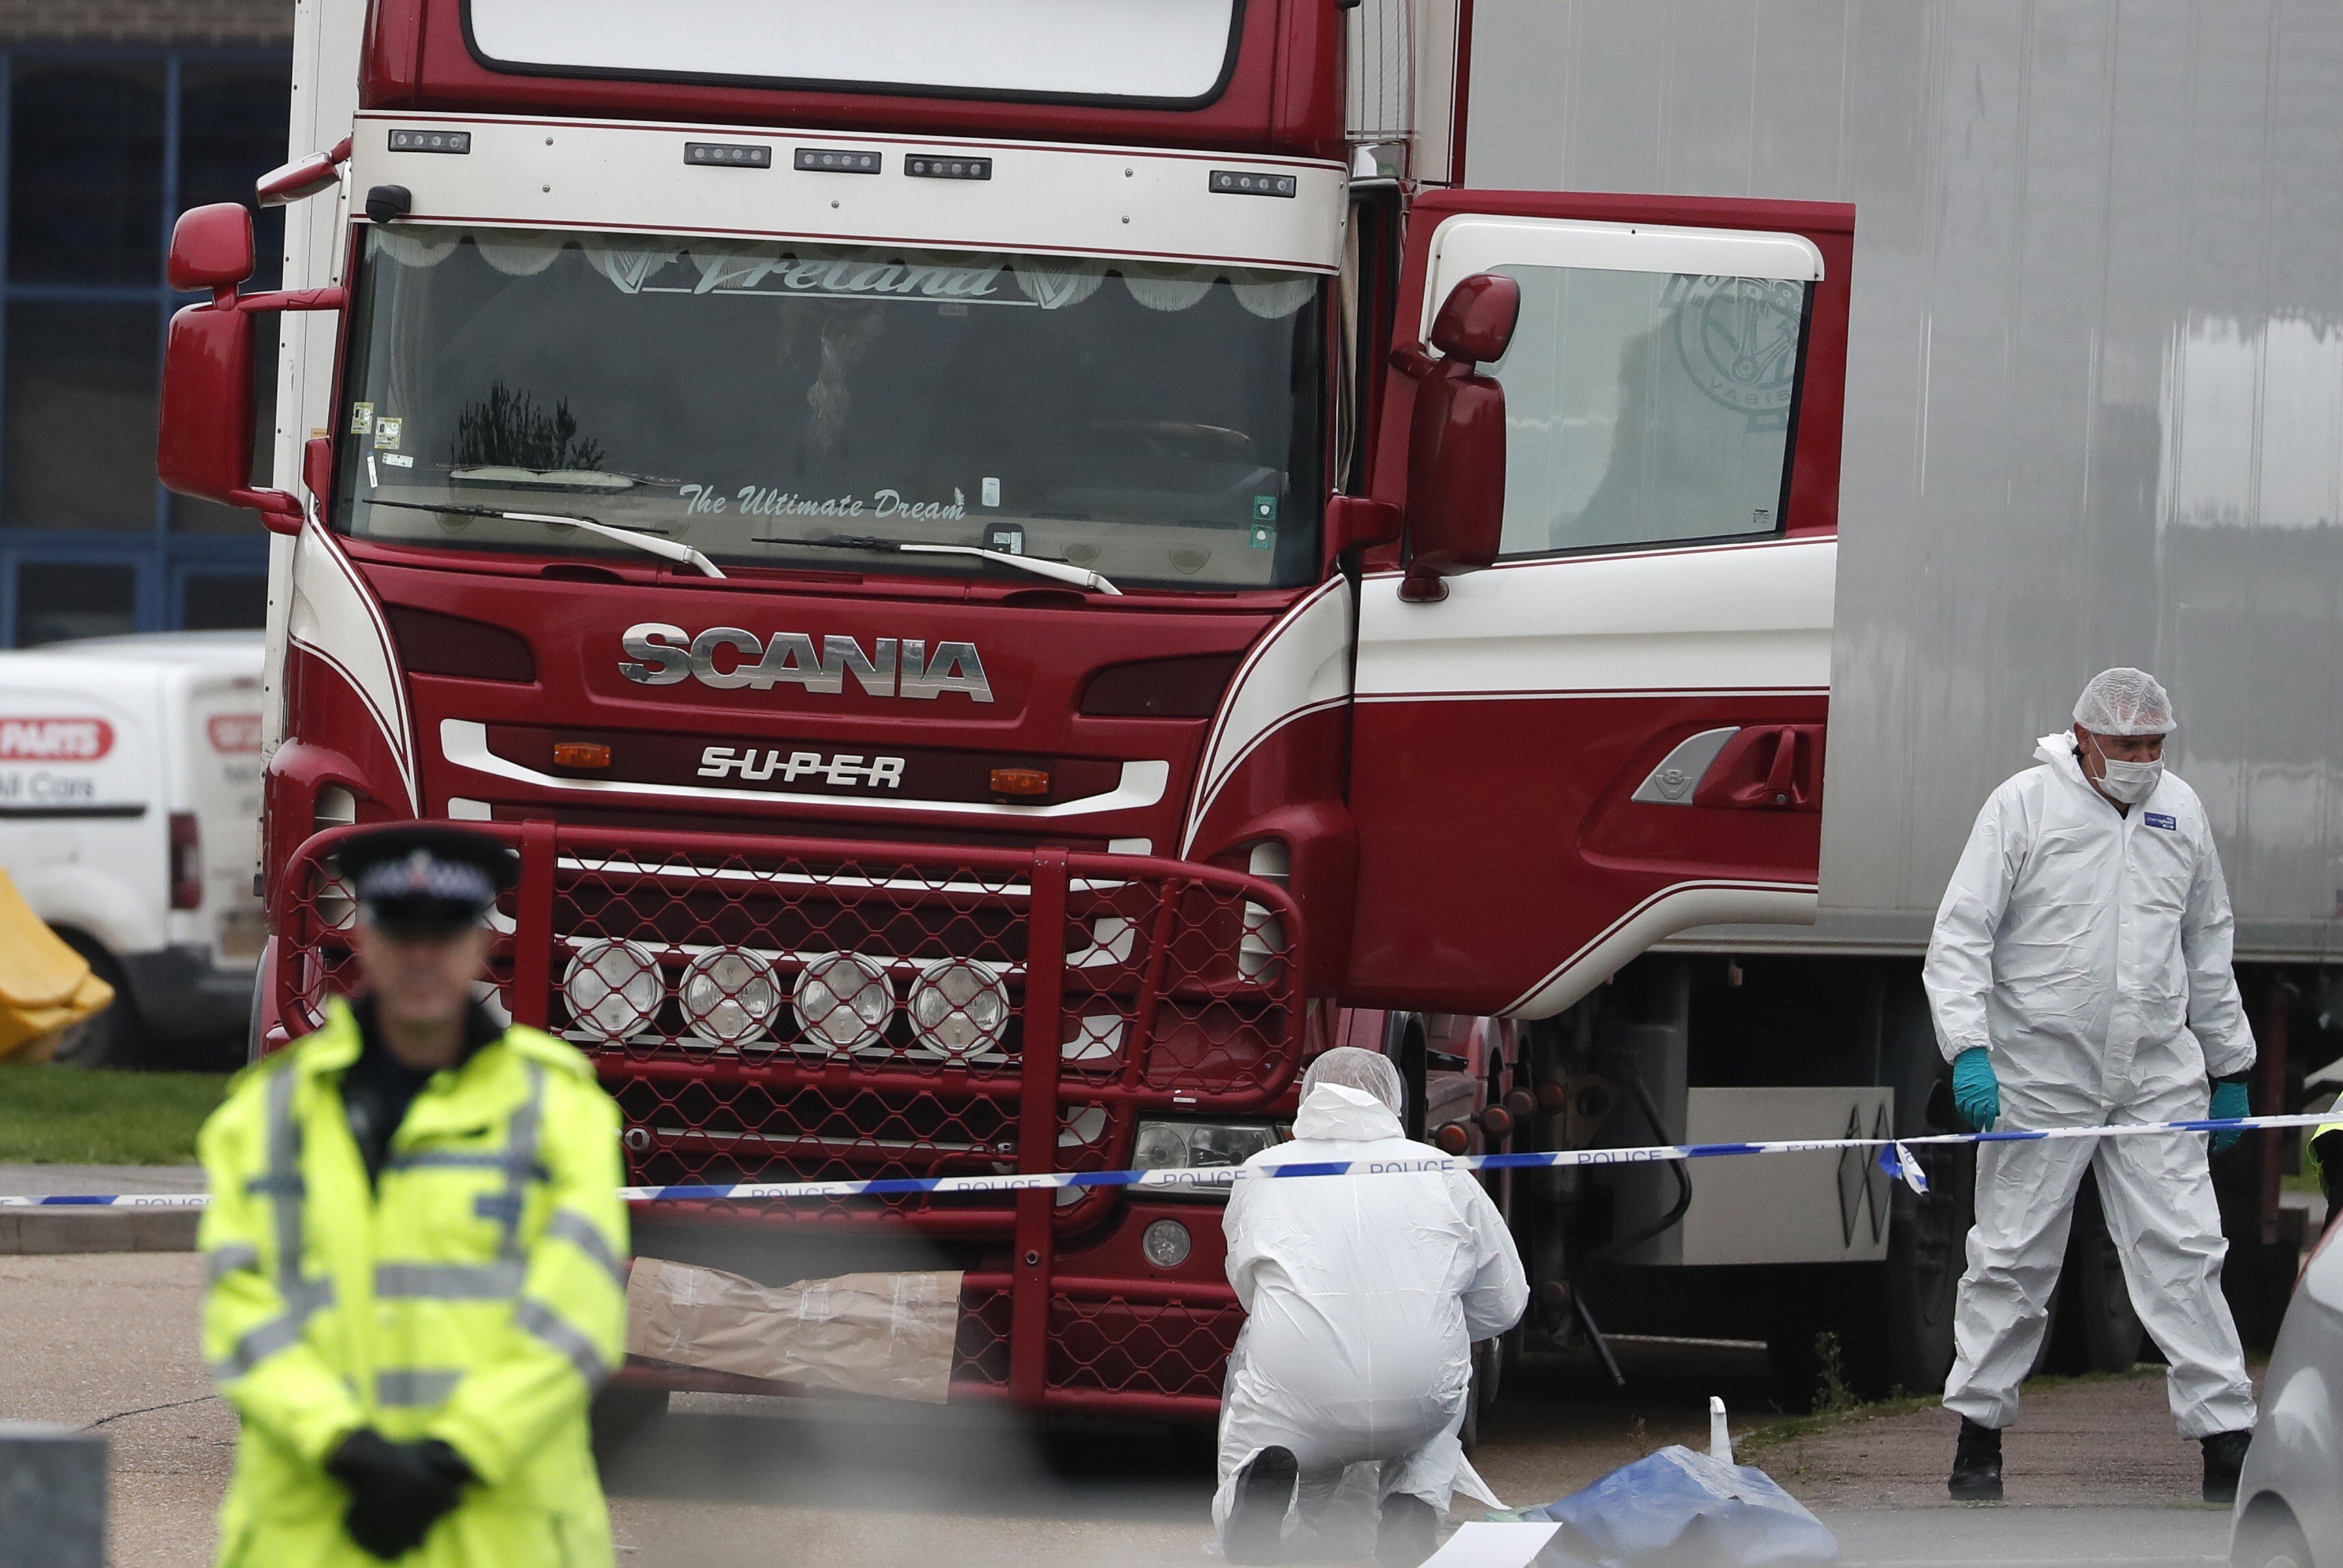 British forensics officers work on the truck, which was found to contain the bodies of 39 people, at an industrial estate east of London in 2019. File photo: AP